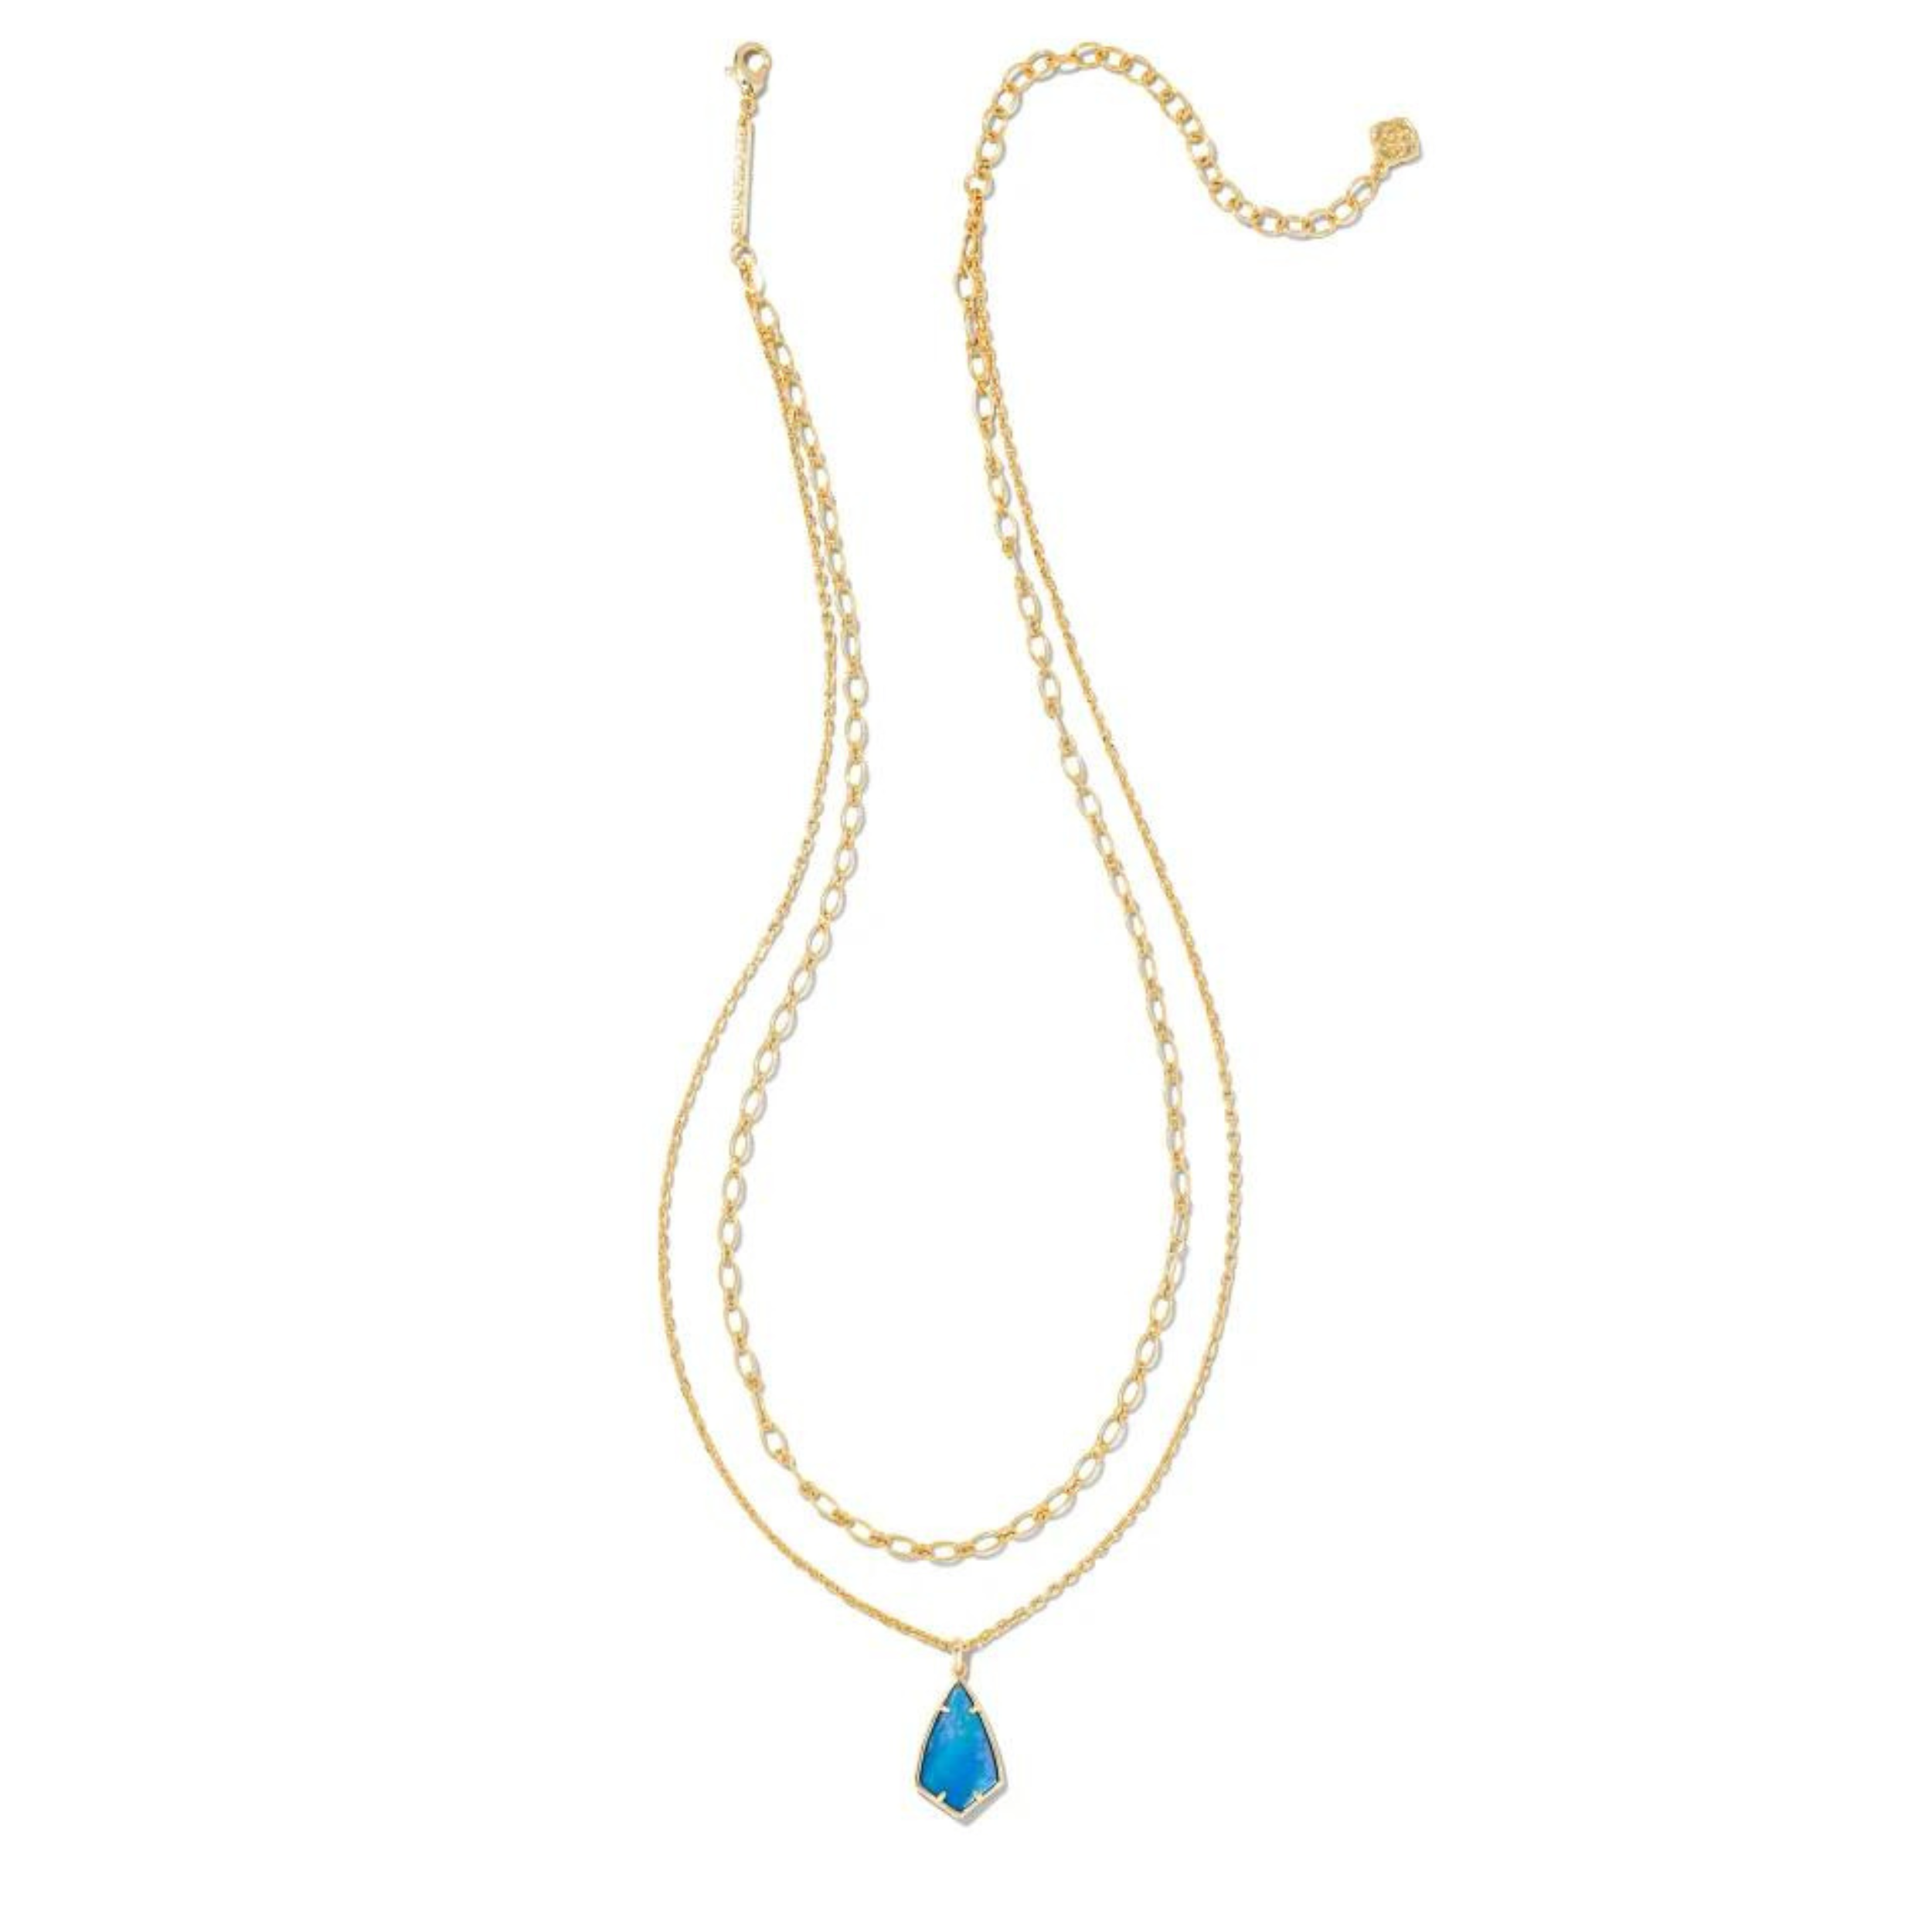 Kendra Scott | Camry Gold Multi Strand Necklace in Dark Blue Mother-of-Pearl - Giddy Up Glamour Boutique